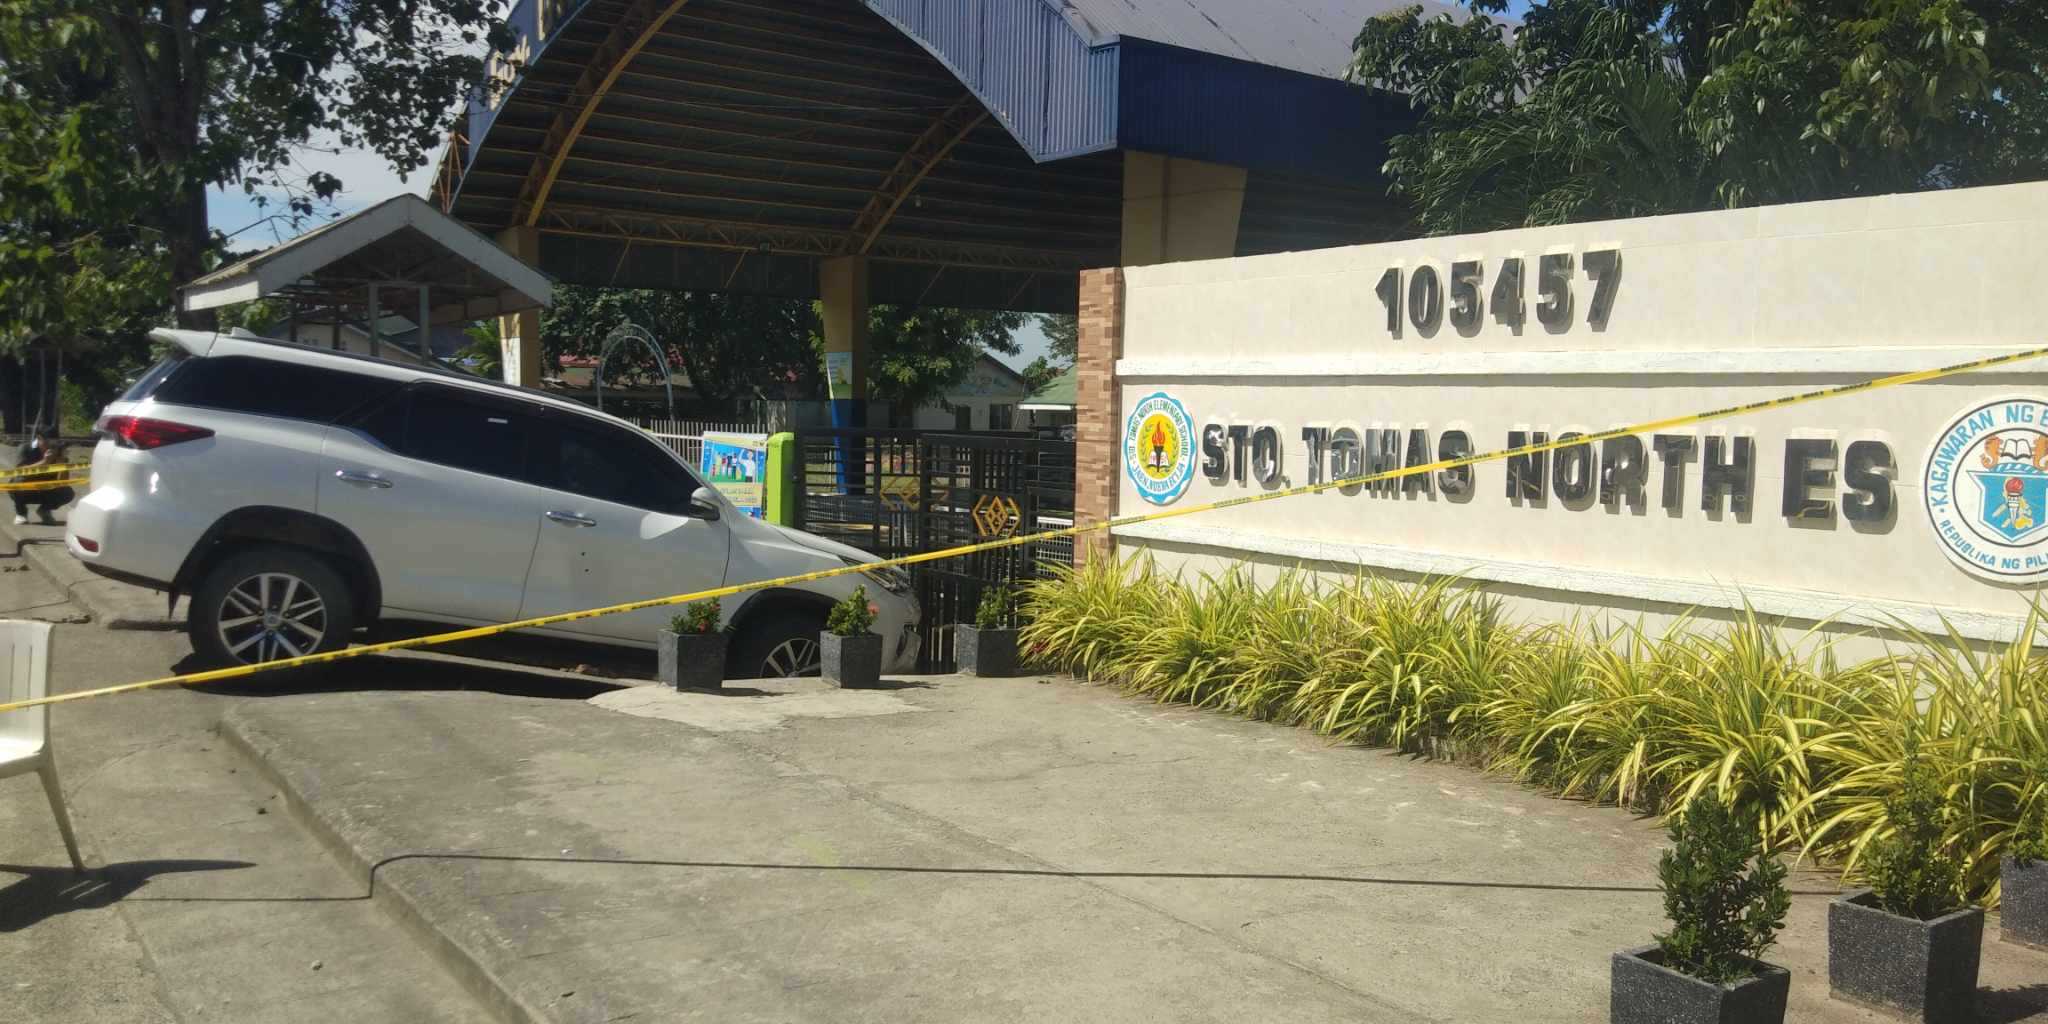 Principal wounded after being shot in front of school in Nueva Ecija